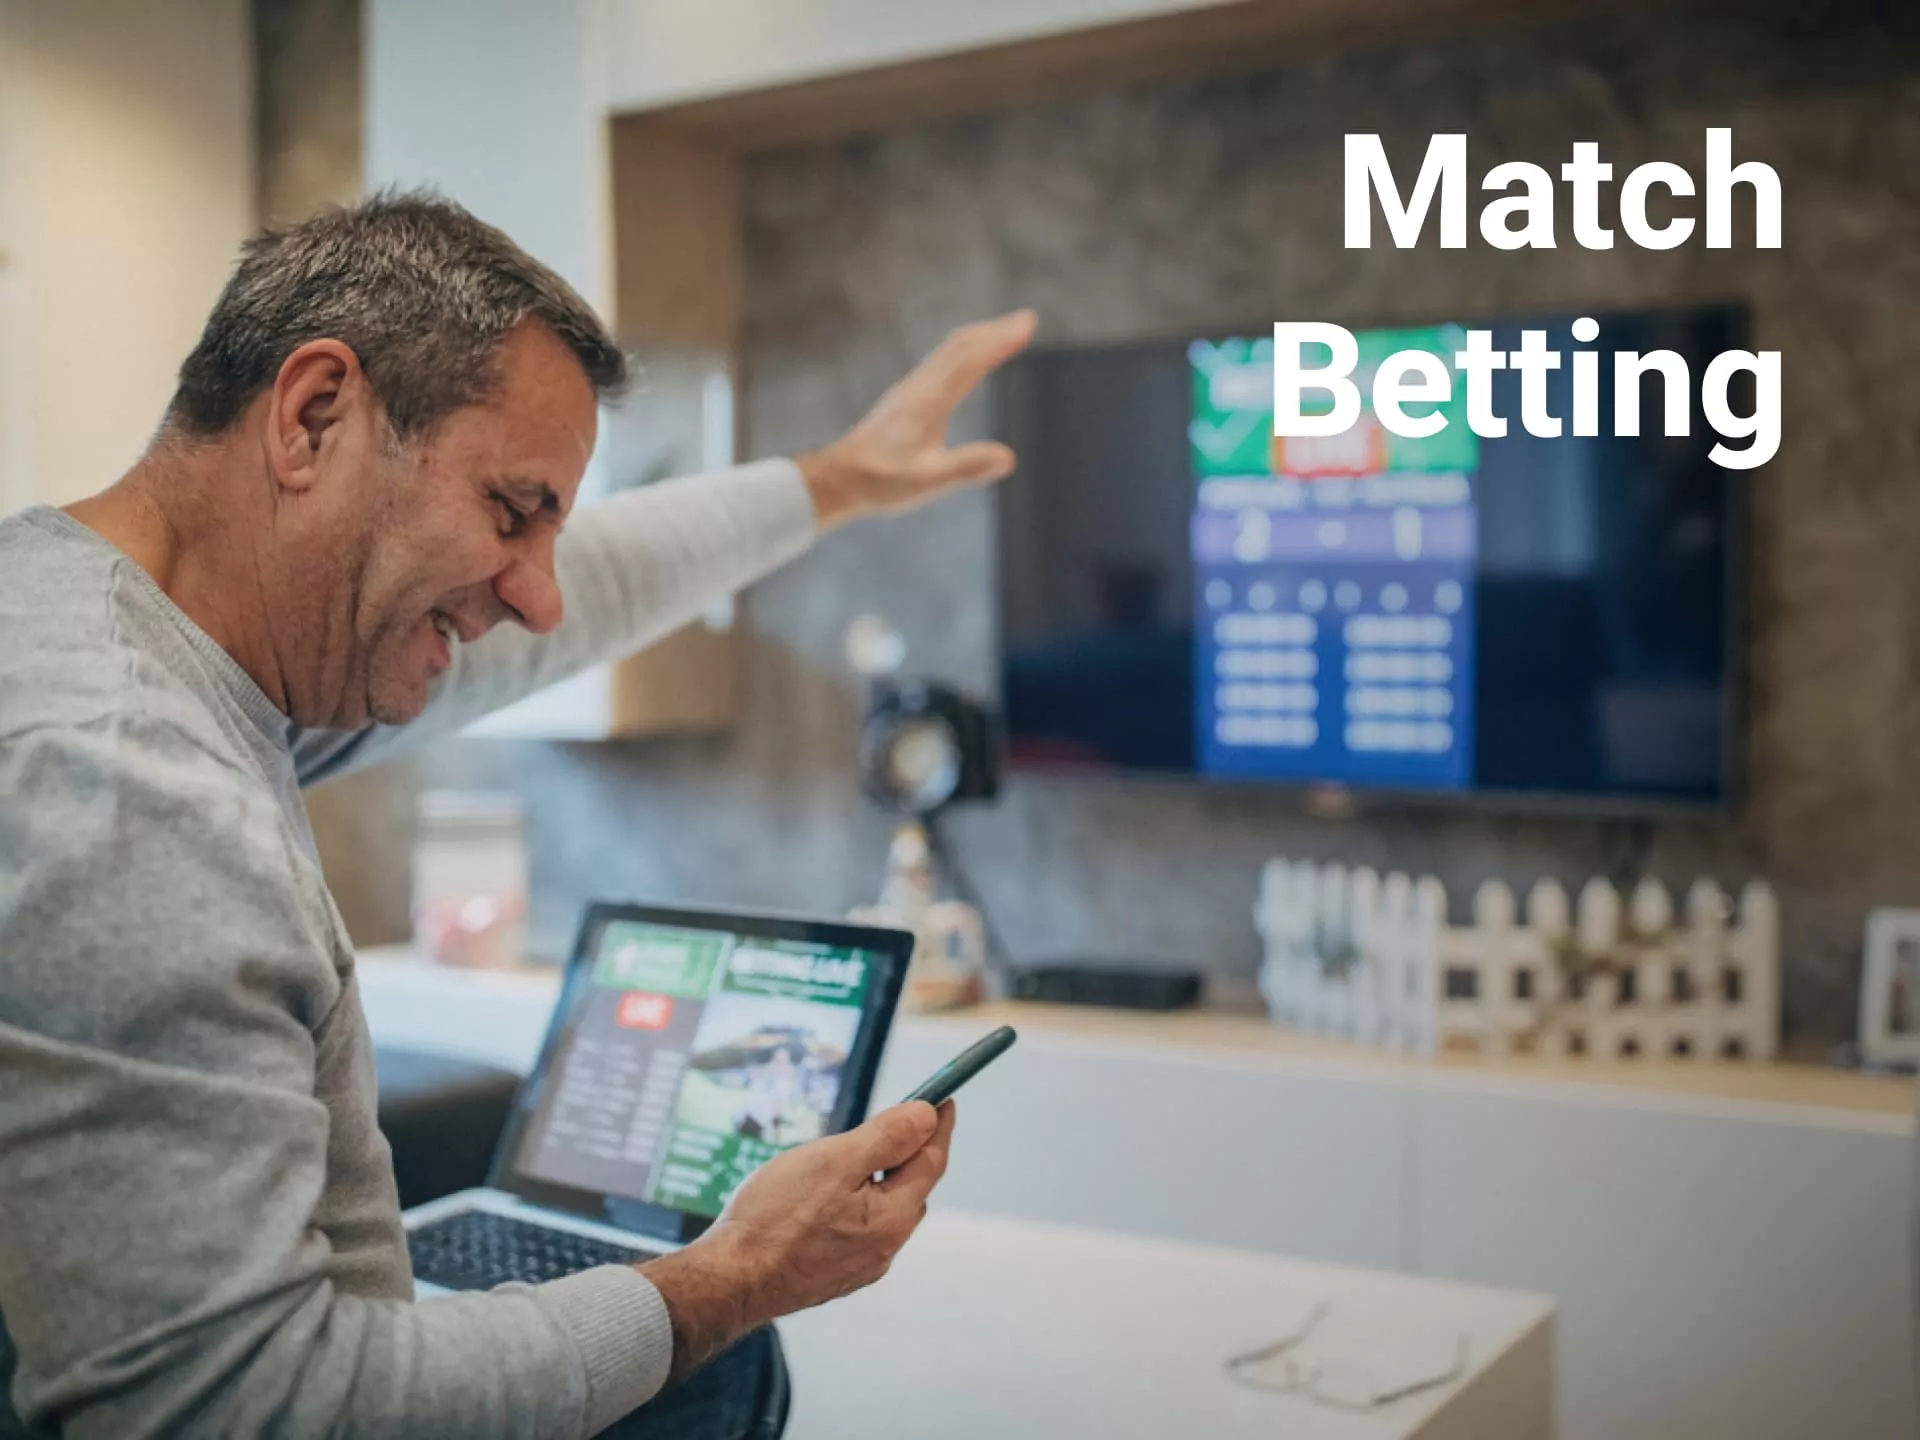 All of the bookmakers have a very large selection of matches, you will find hundreds of options for online betting.